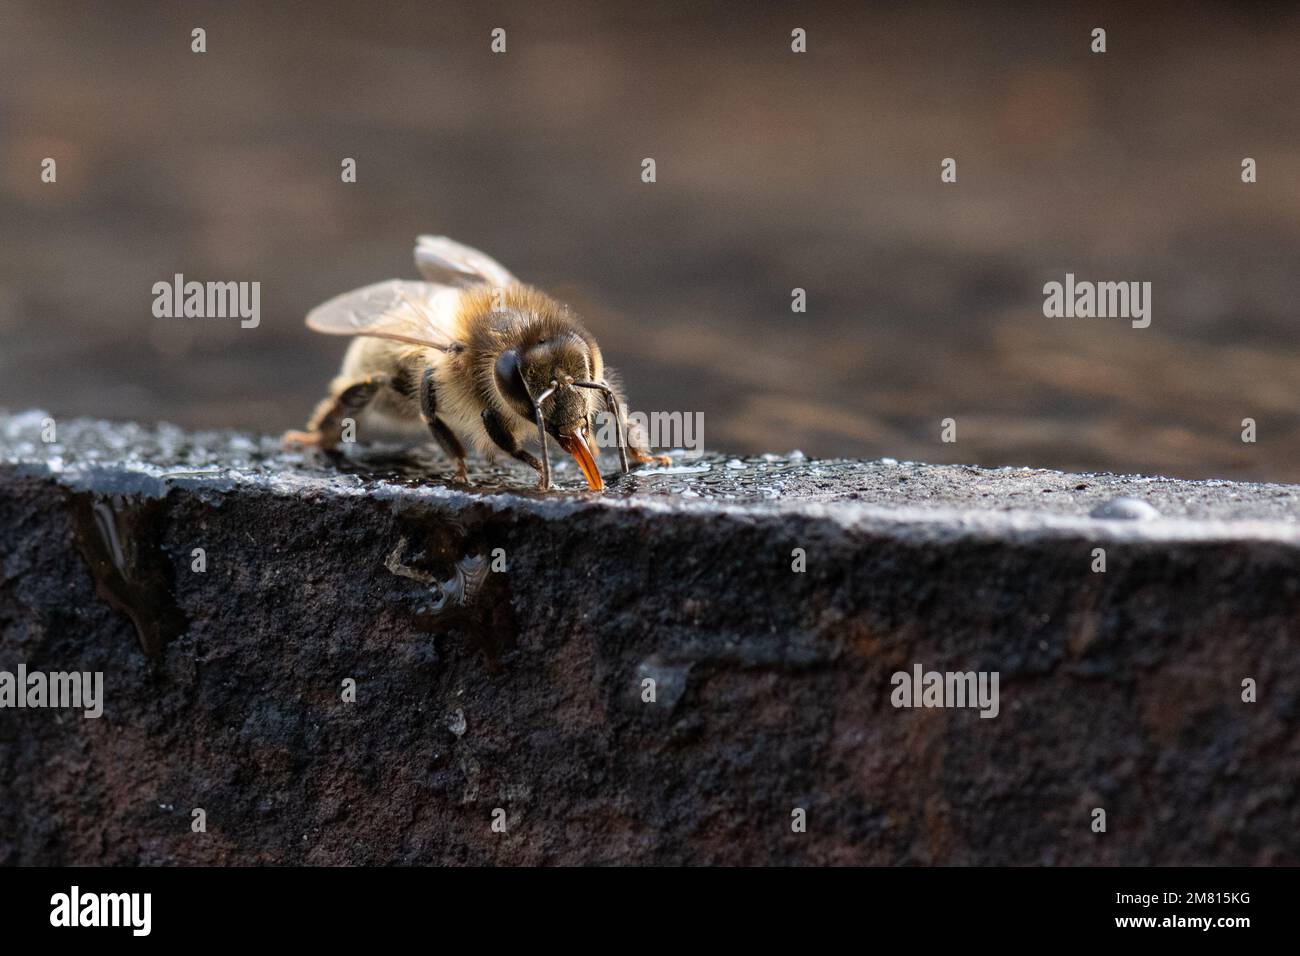 Honey bee (Apis mellifera) drinking or collecting water from metal rim of old whisky barrel - Scotland, UK Stock Photo